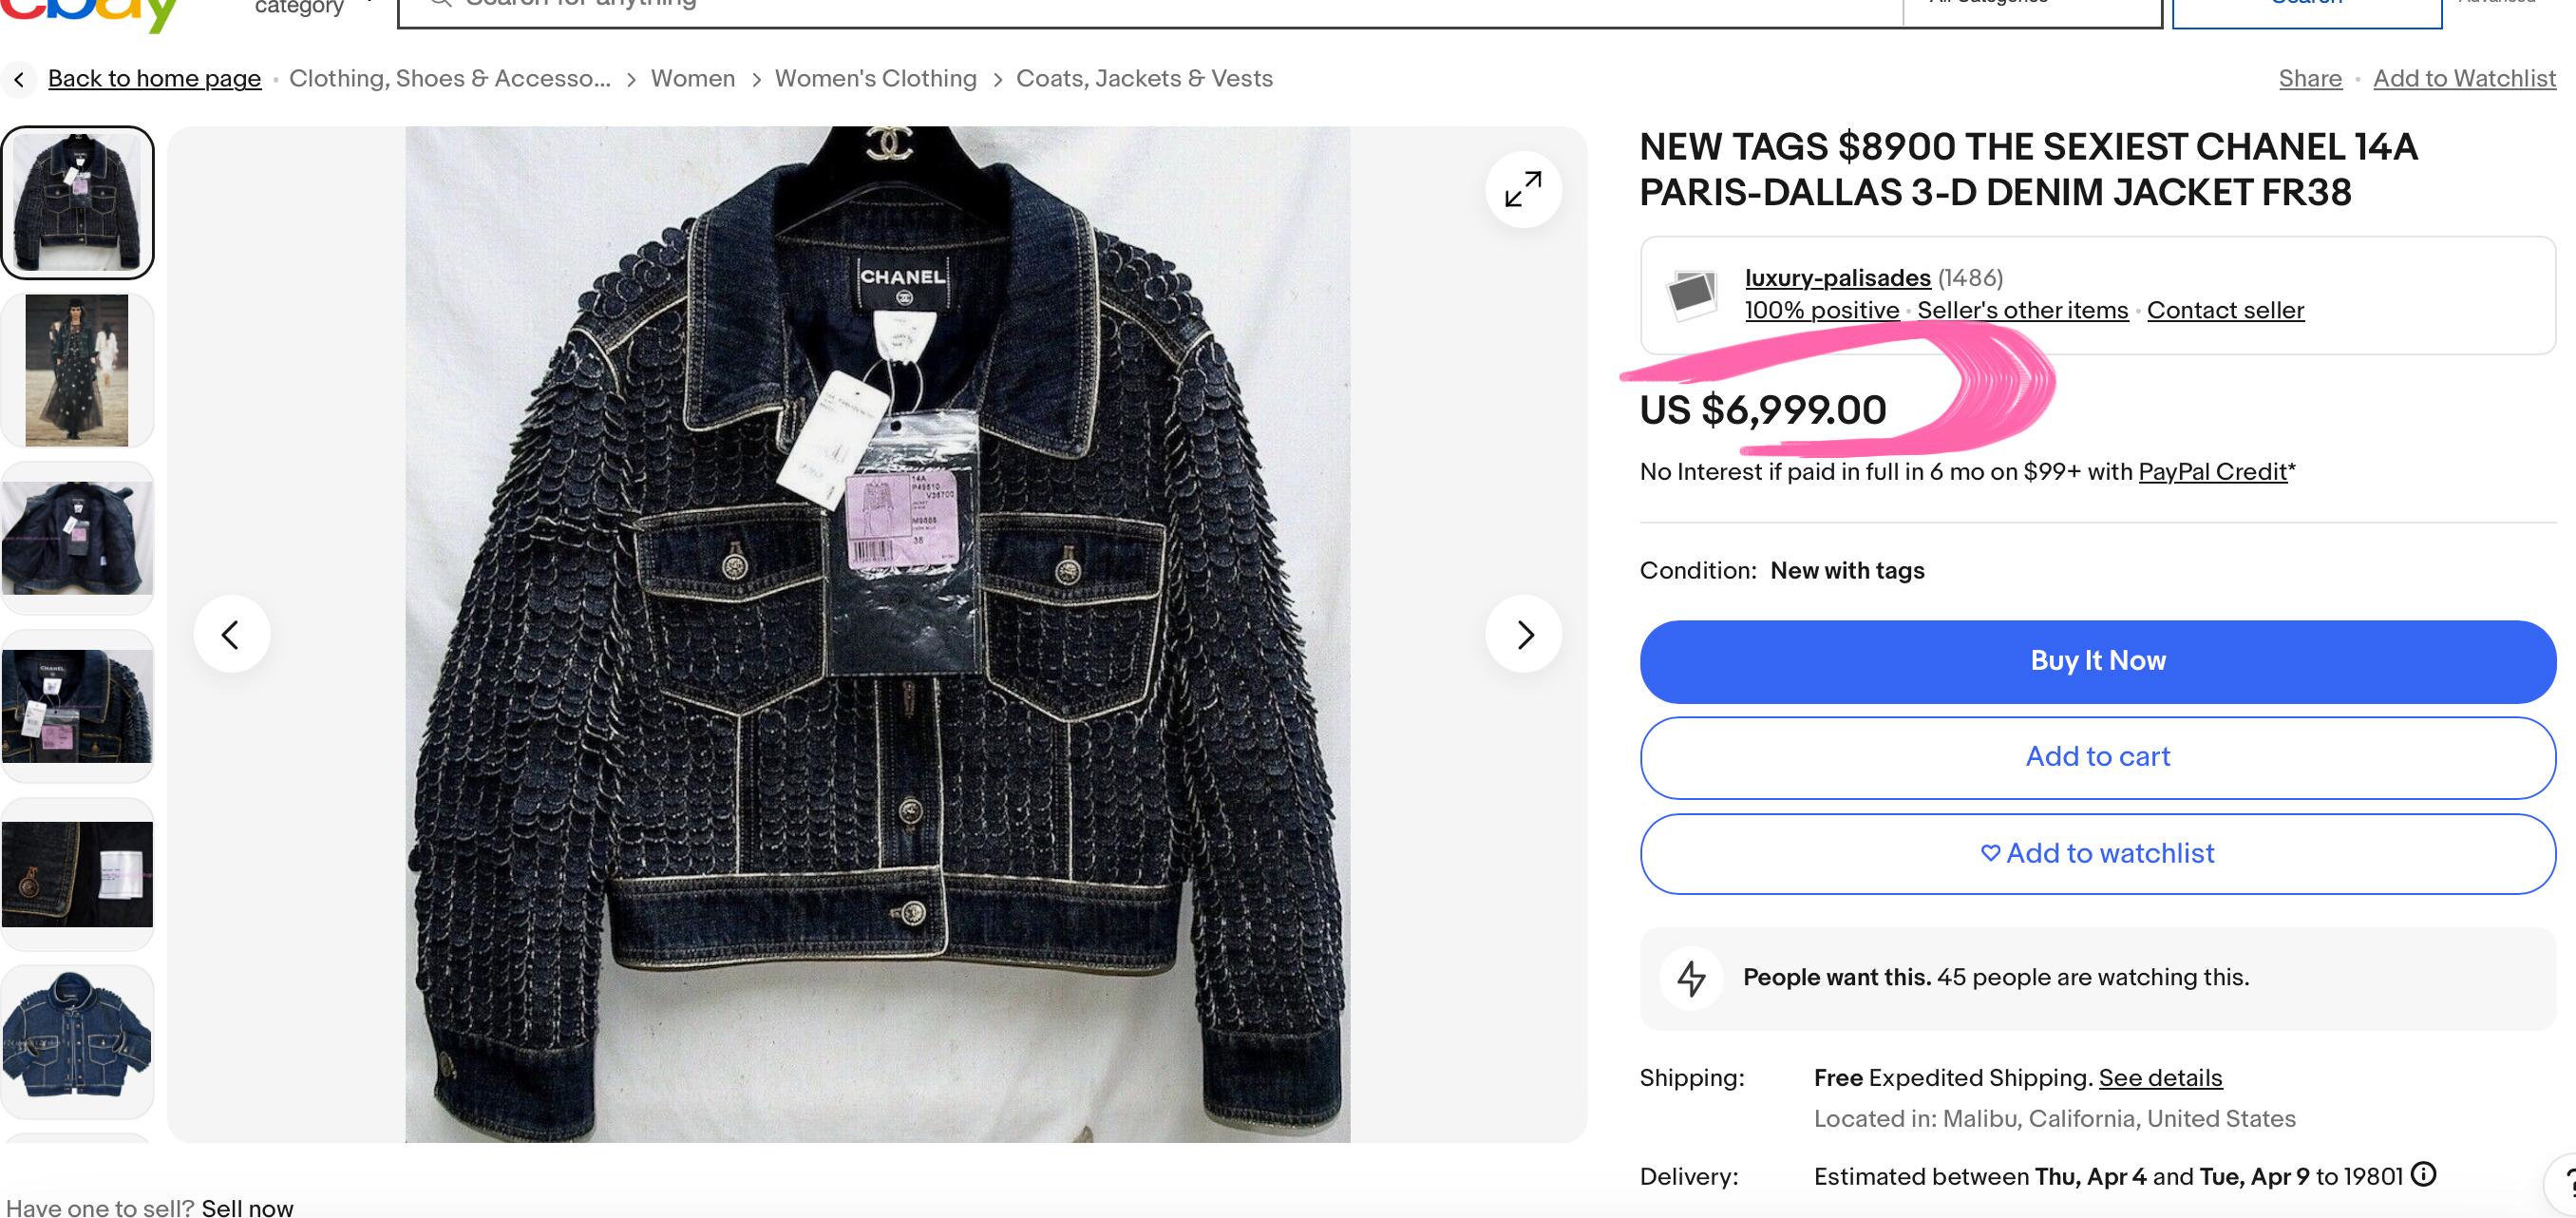 Iconic Chanel washed denim jacket from Catwalk of Paris / DALLAS Collection, 2014 Metiers d'Art
- As seen in Ad Campaign
- gold trim throughout
- tonal CC logo lining
Size mark 38 FR. Condition is pristine.